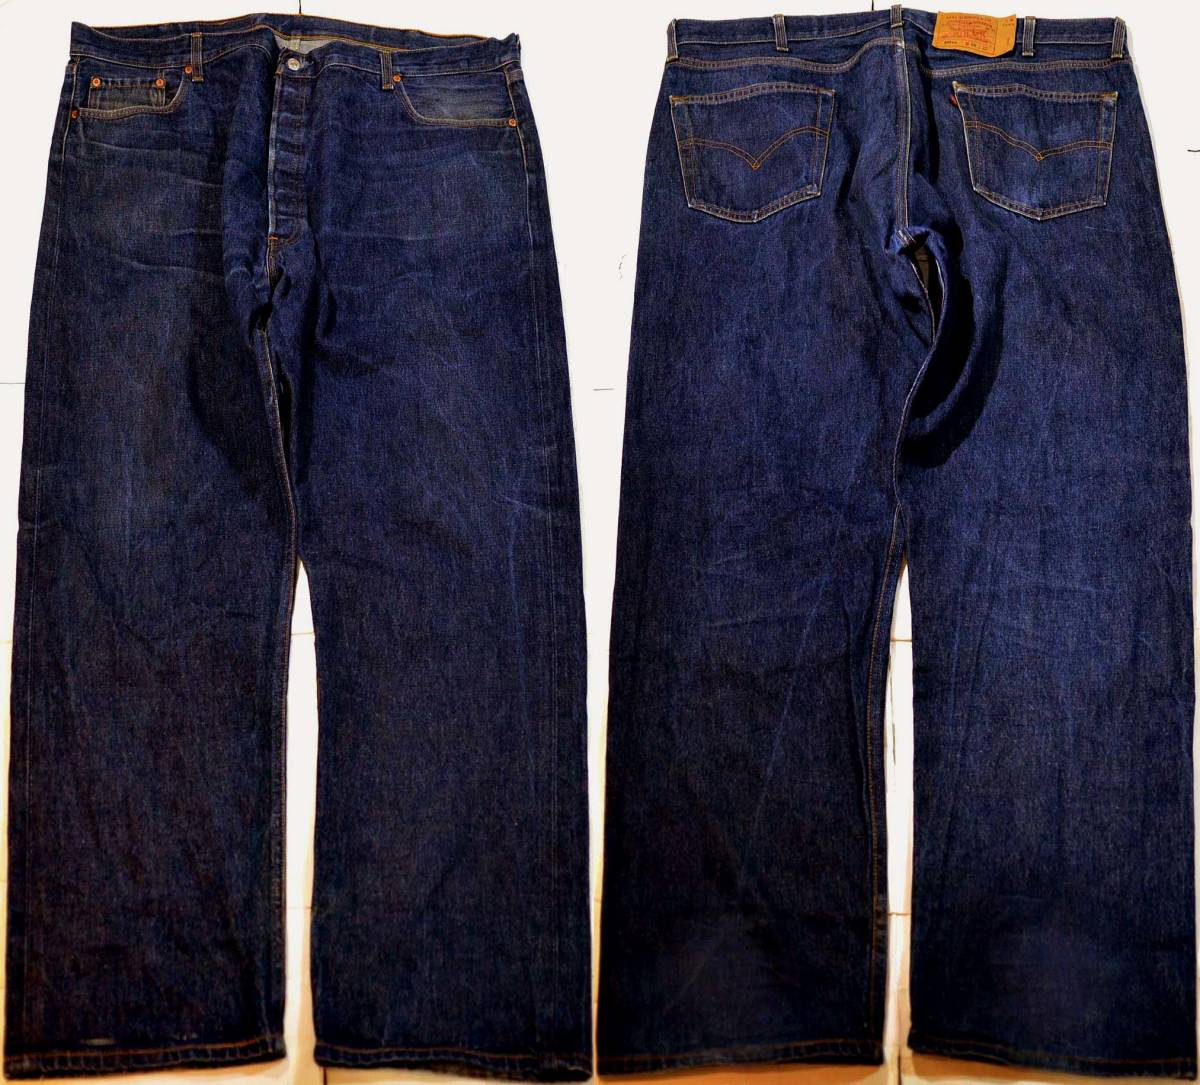 t307/LEVIS501xx アメリカ製 MADE IN U.S.A. 濃紺極上！激ヒゲ！